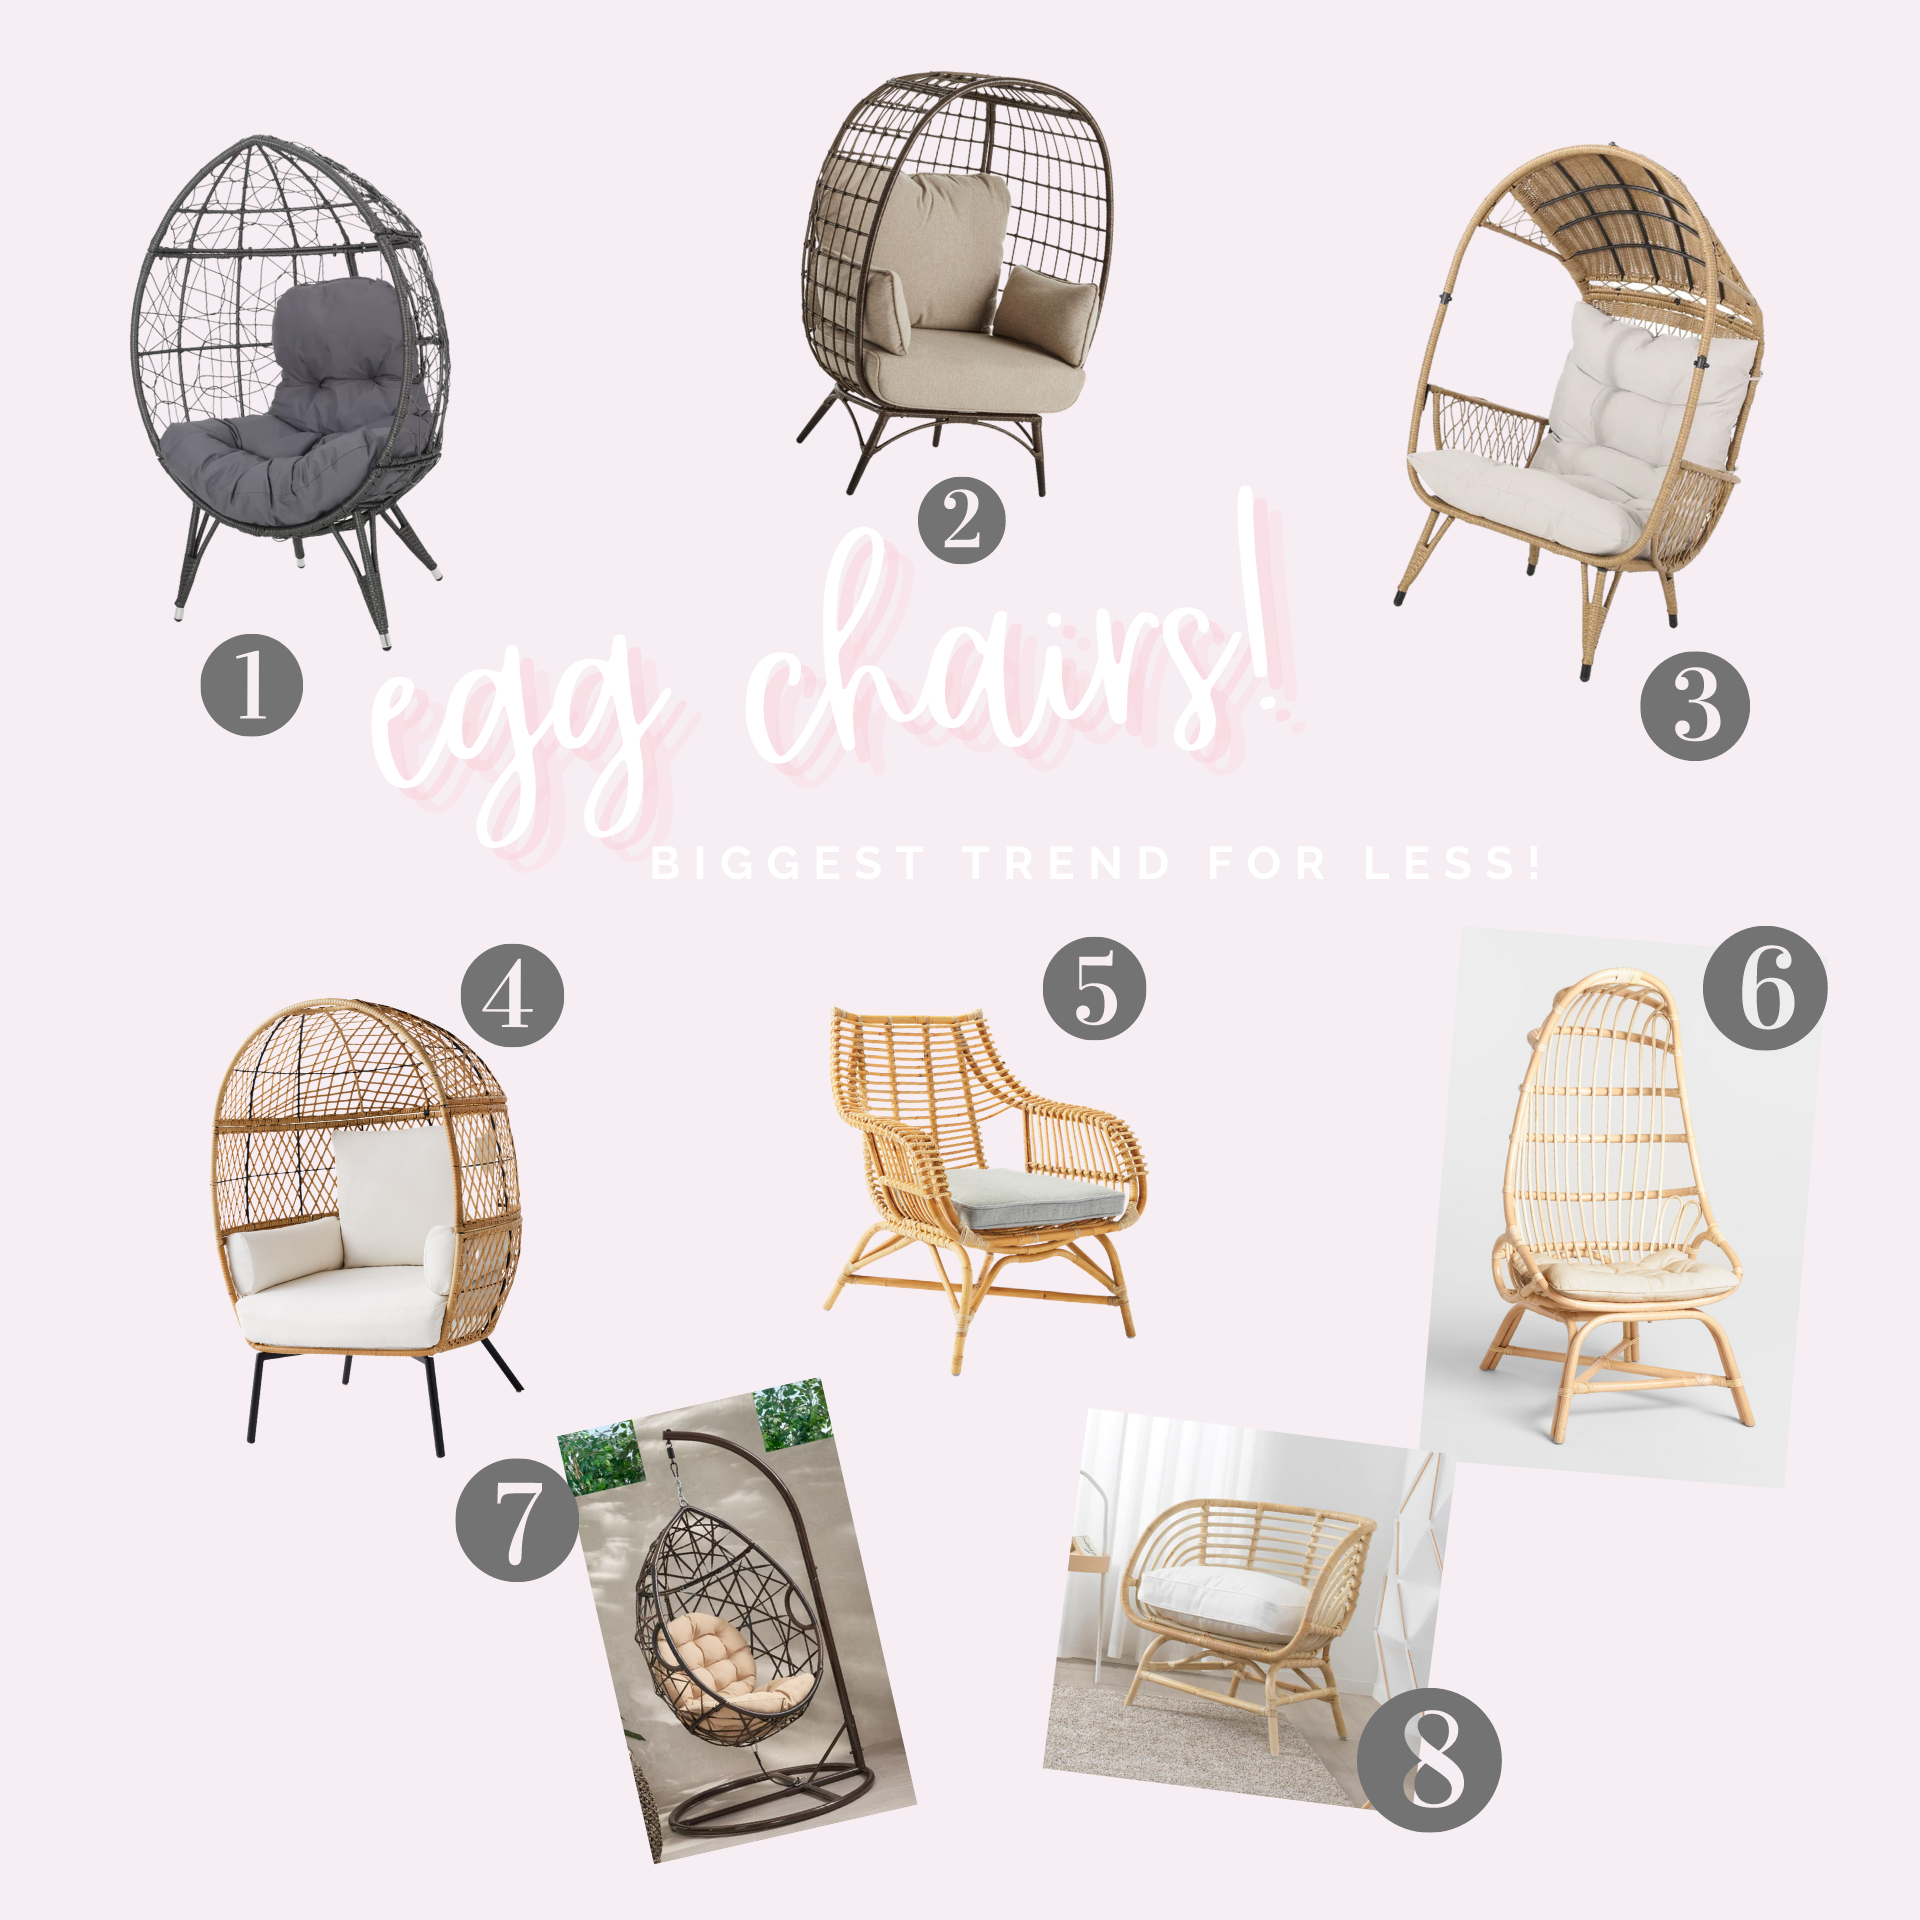 Egg Chair Round Up!